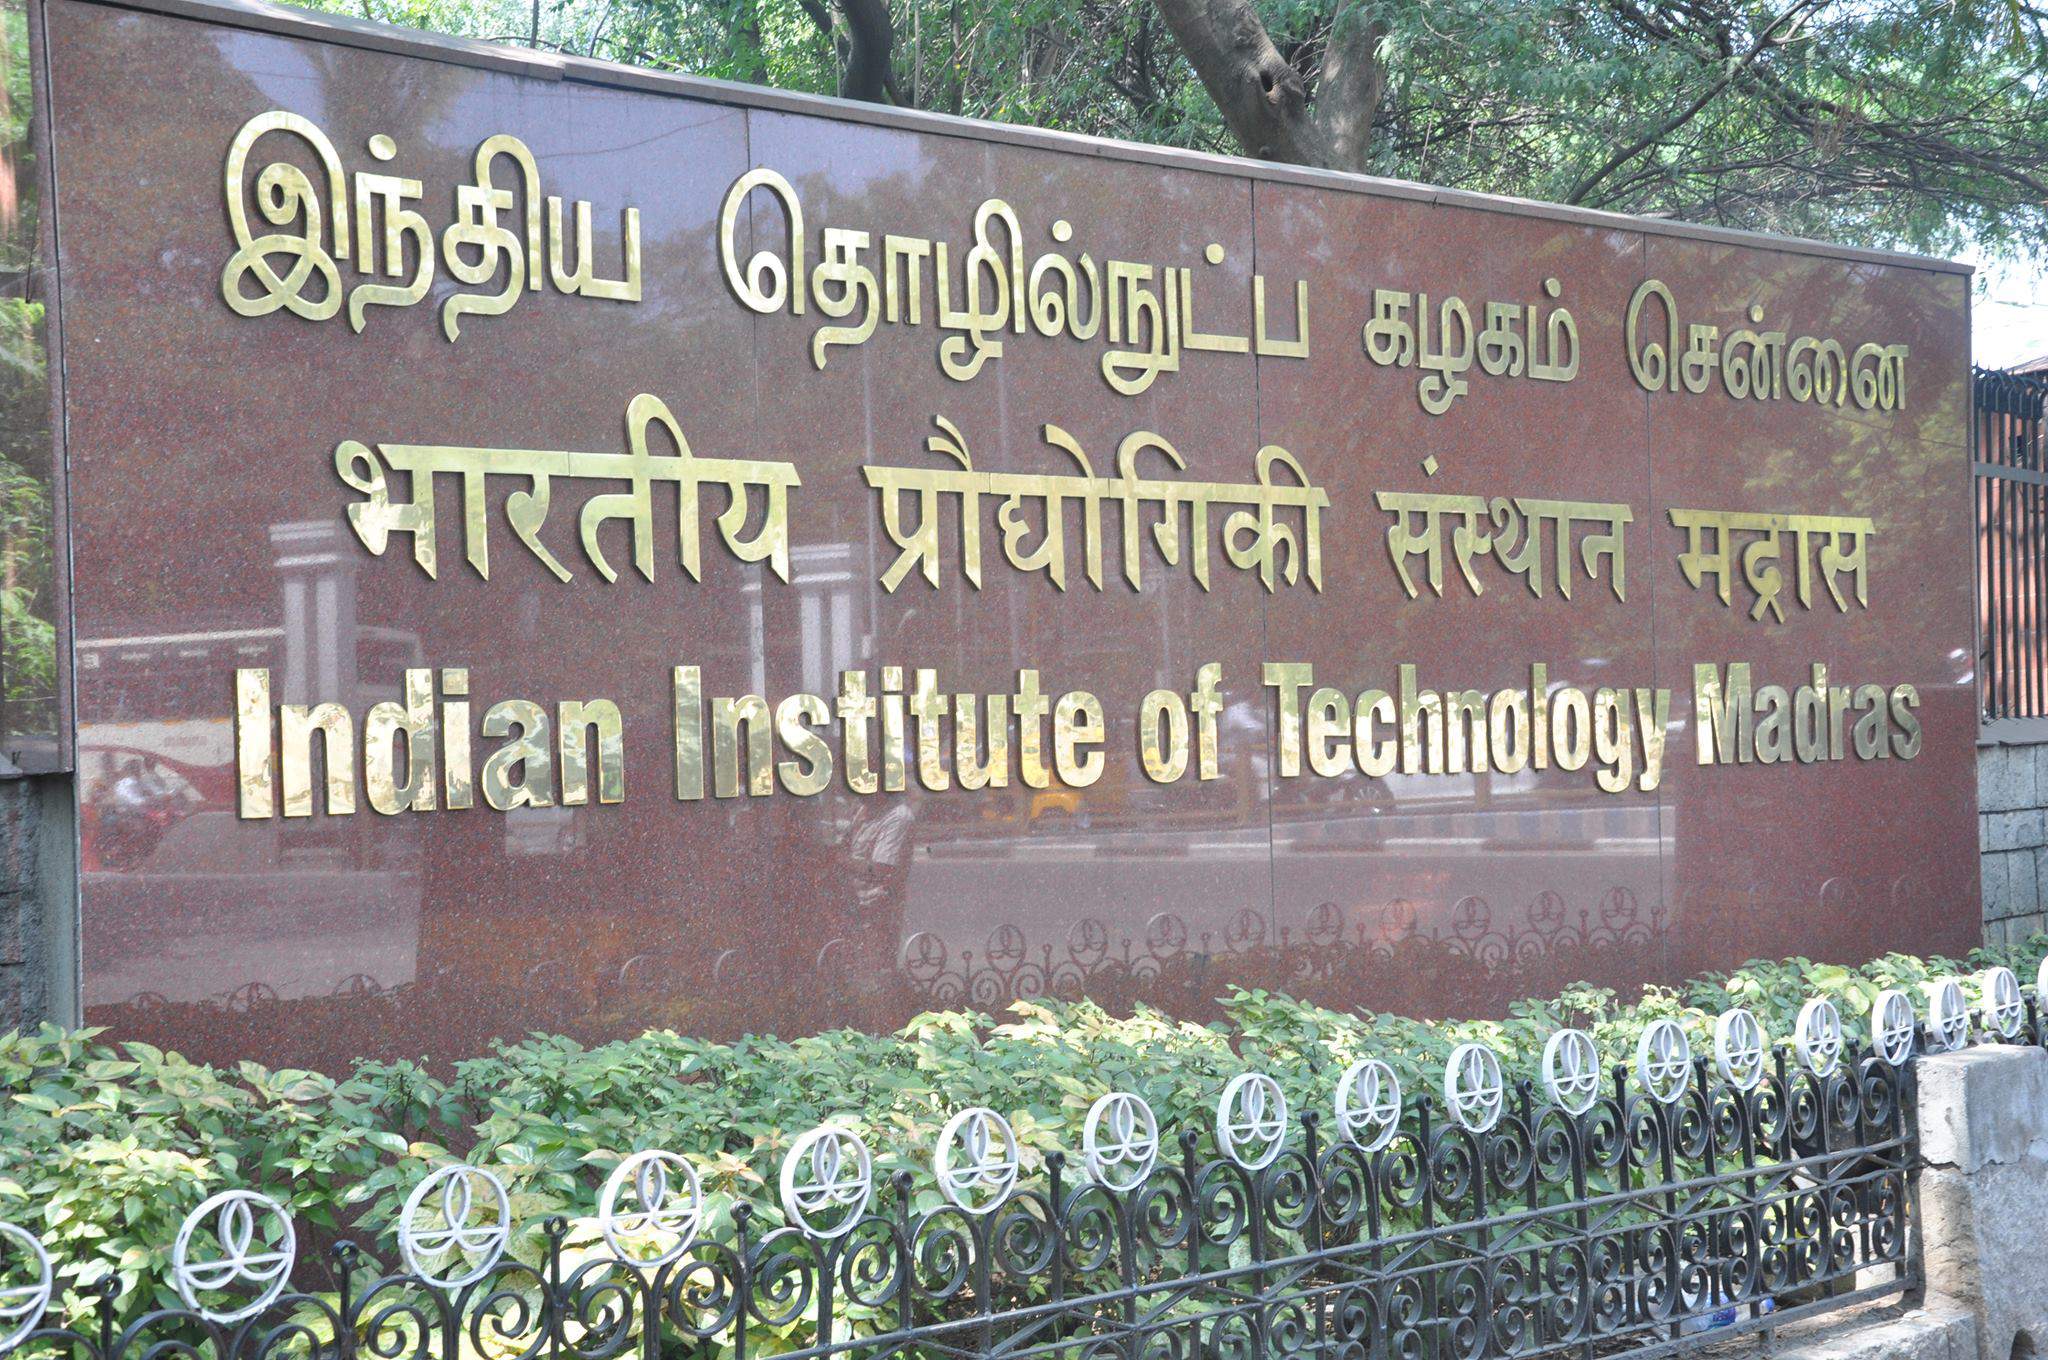 When will online classes start for IIT Madras? There is no